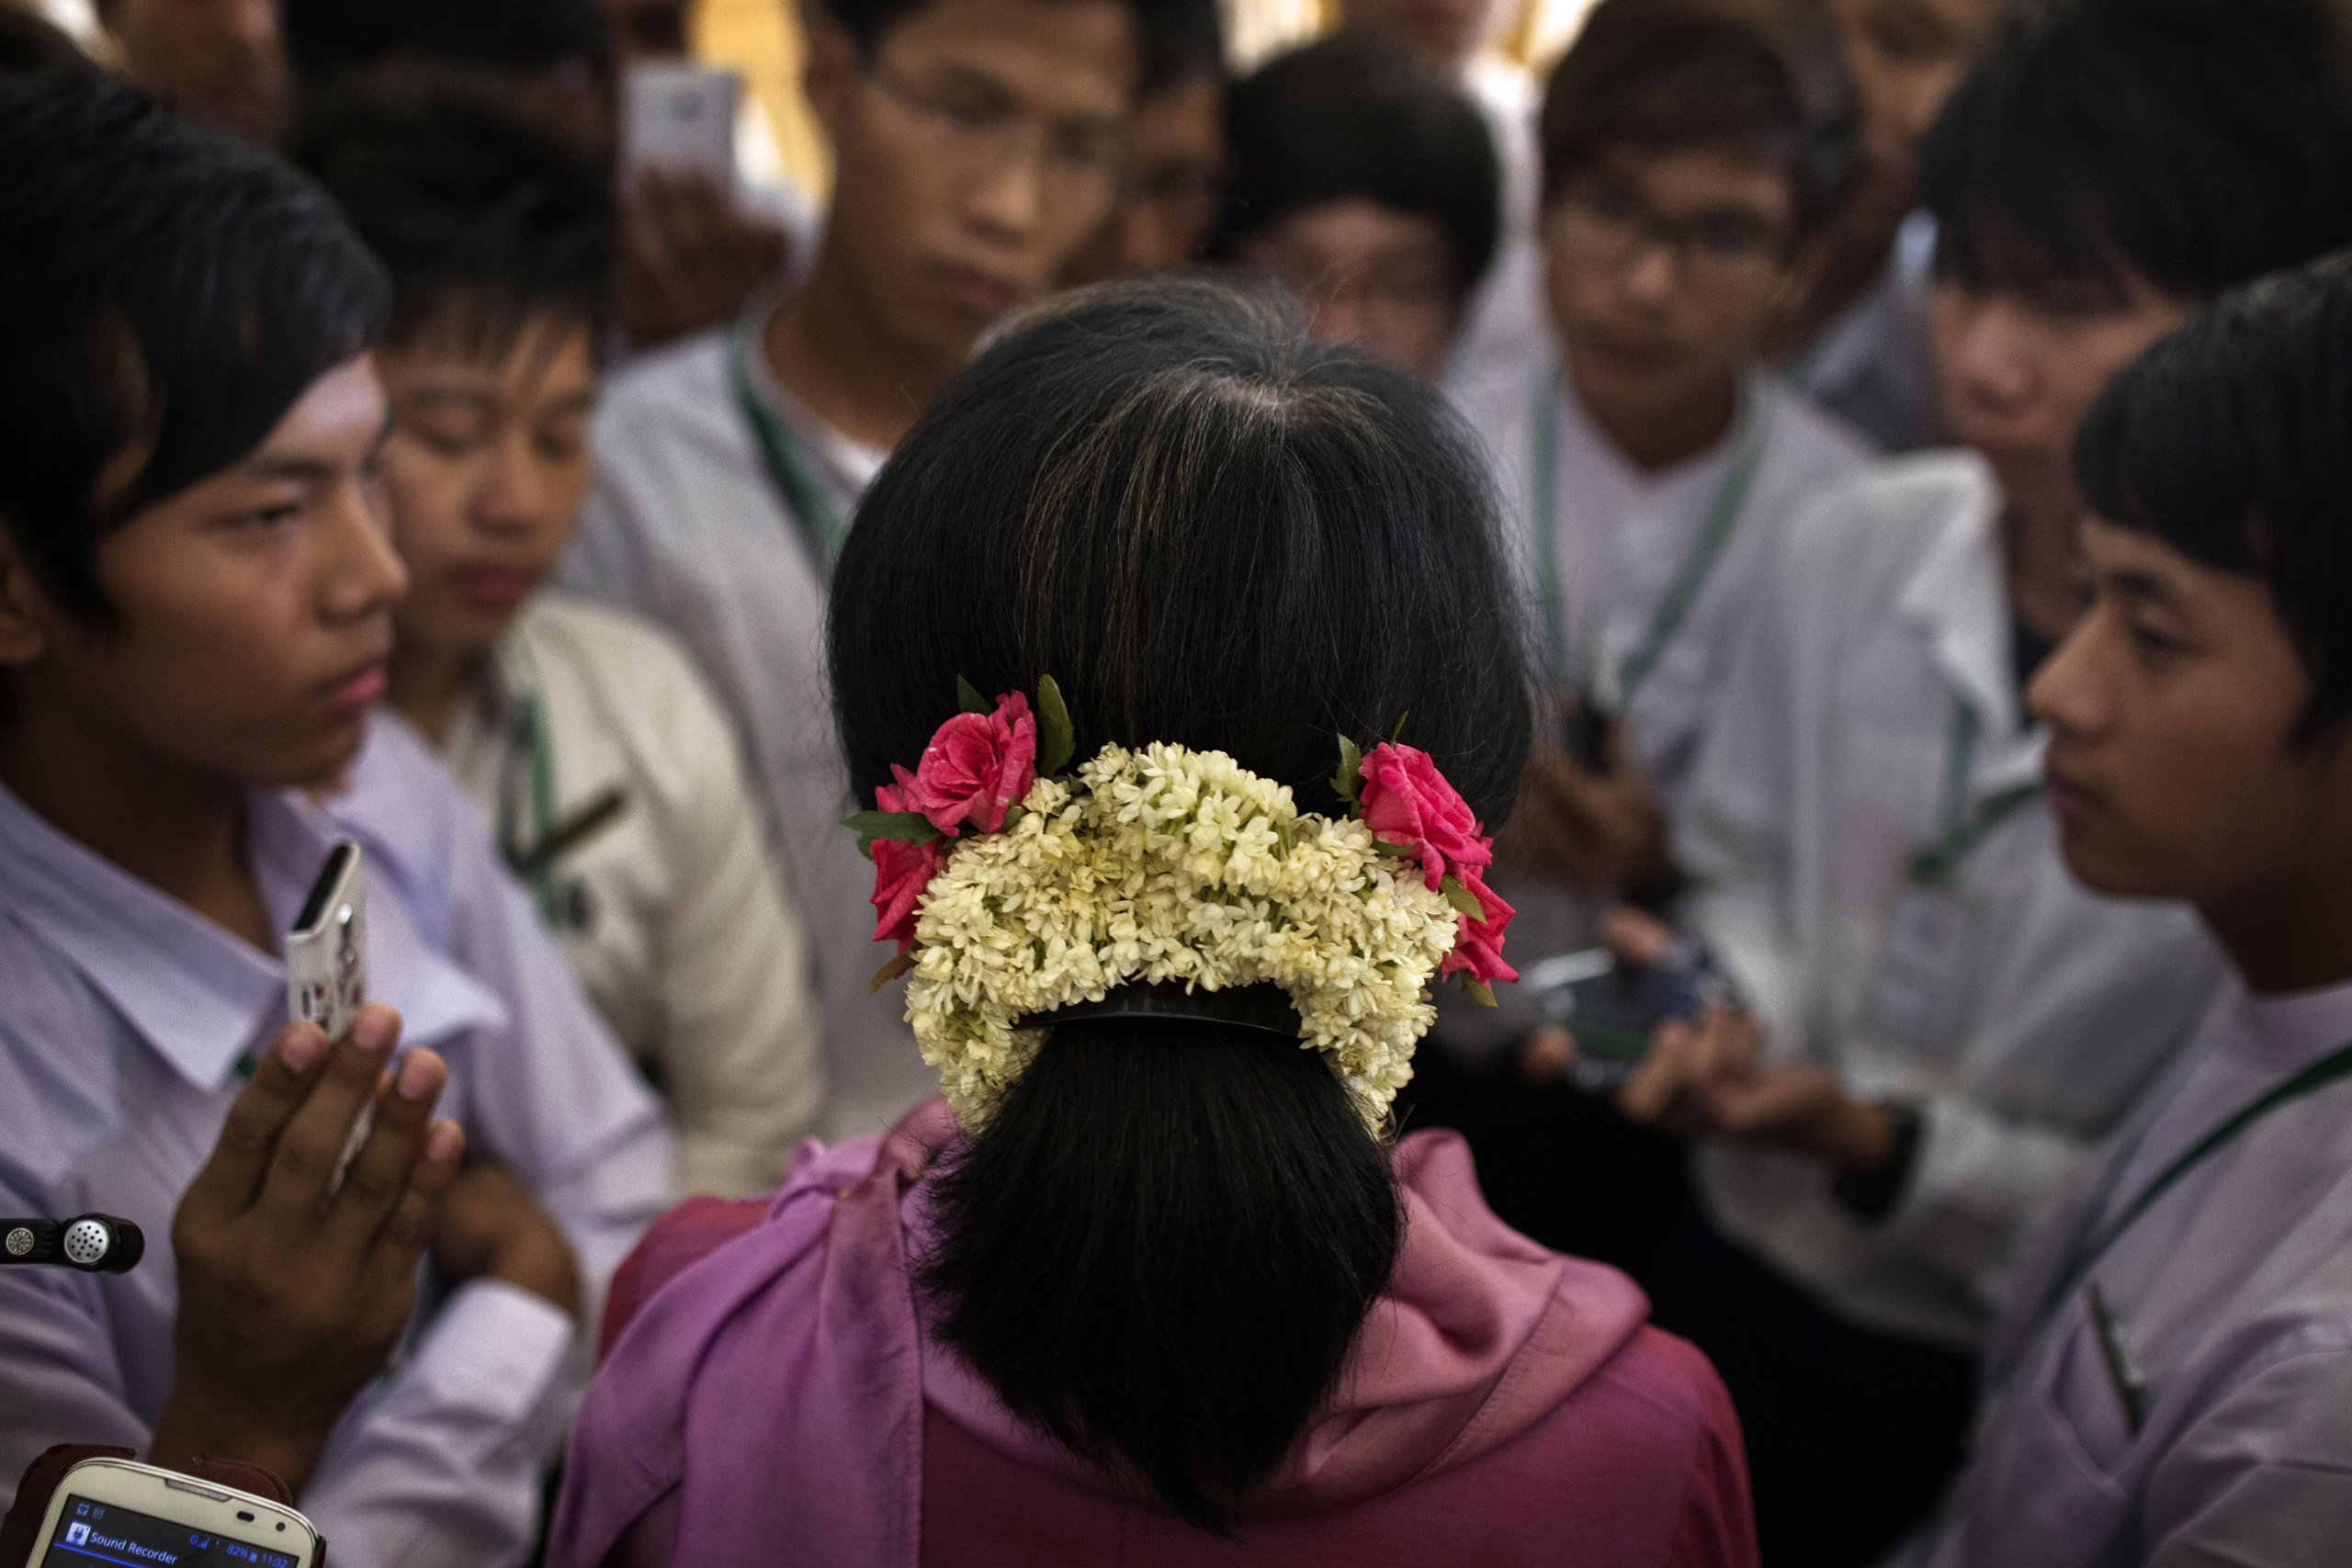 Aung San Suu Kyi talks to visiting students from Meiktila , during a break in a parliamentary session in Naypyidaw, June 20, 2014.